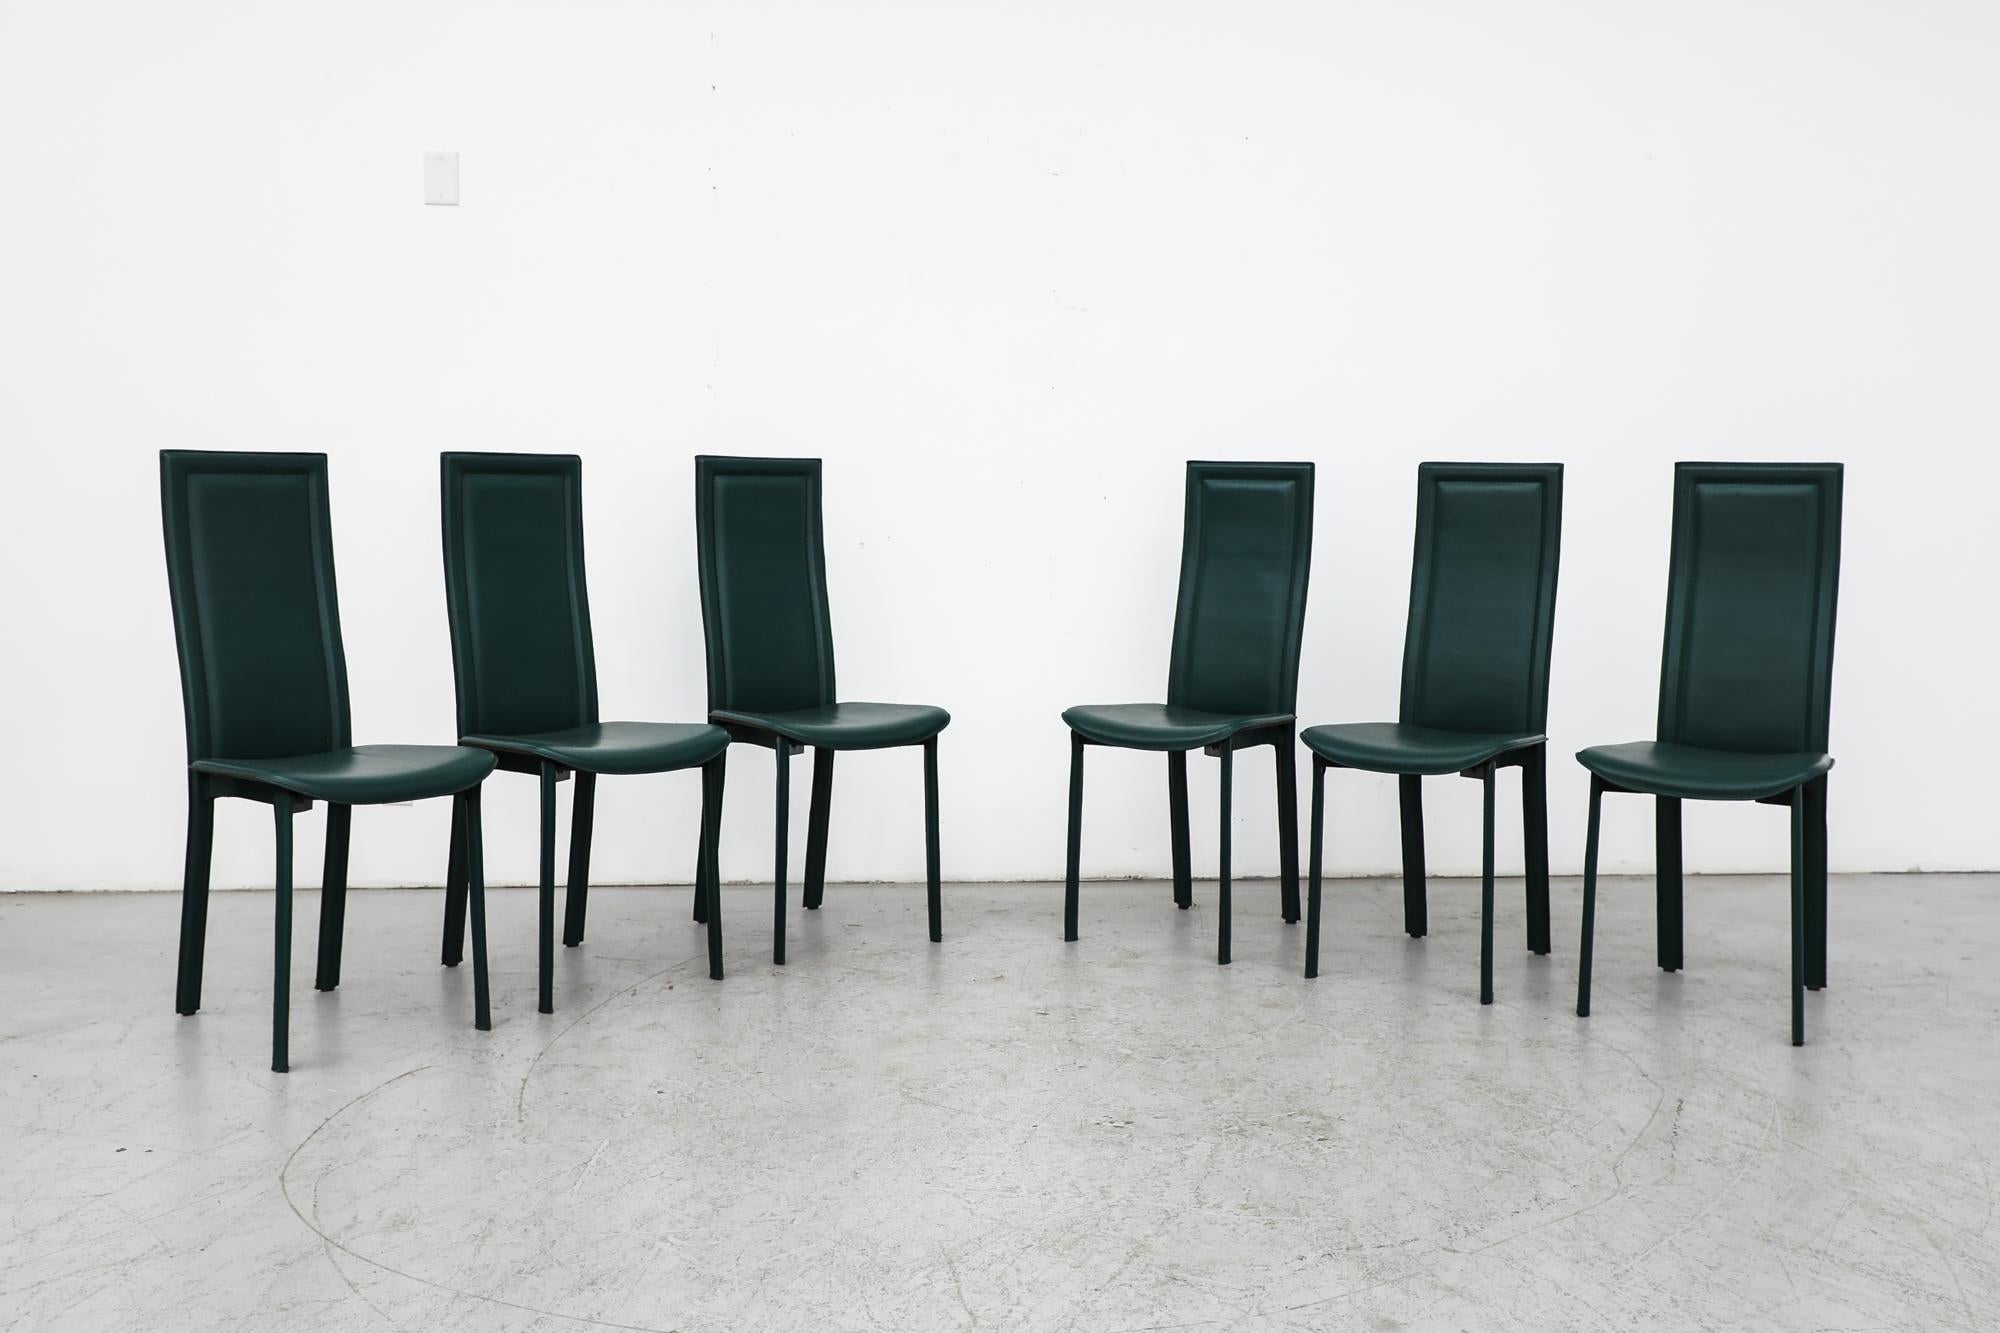 Set of 6 CATTELAN ITALIA high back green leather dining chairs with leather wrapped legs. 1980s. In original condition with visible wear, including pitting and discoloration to the chrome and patina on leather. Wear is consistent with their age and